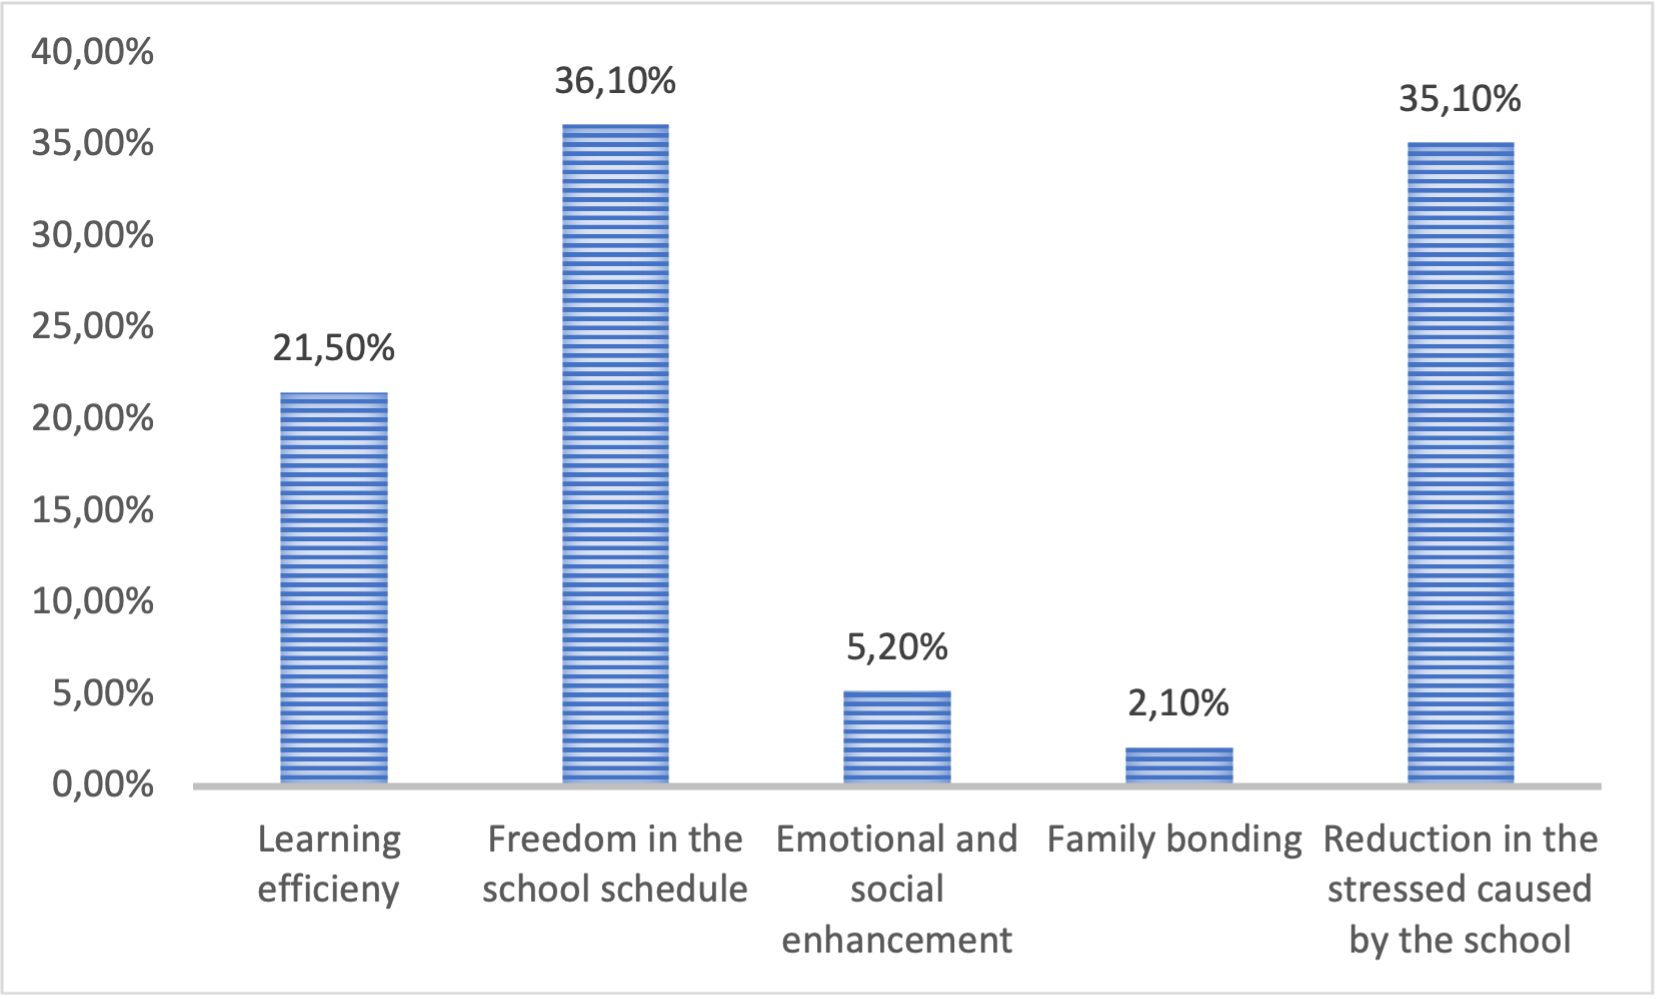 Parents/ legal representatives’ perception on the advantages of the homeschooling system